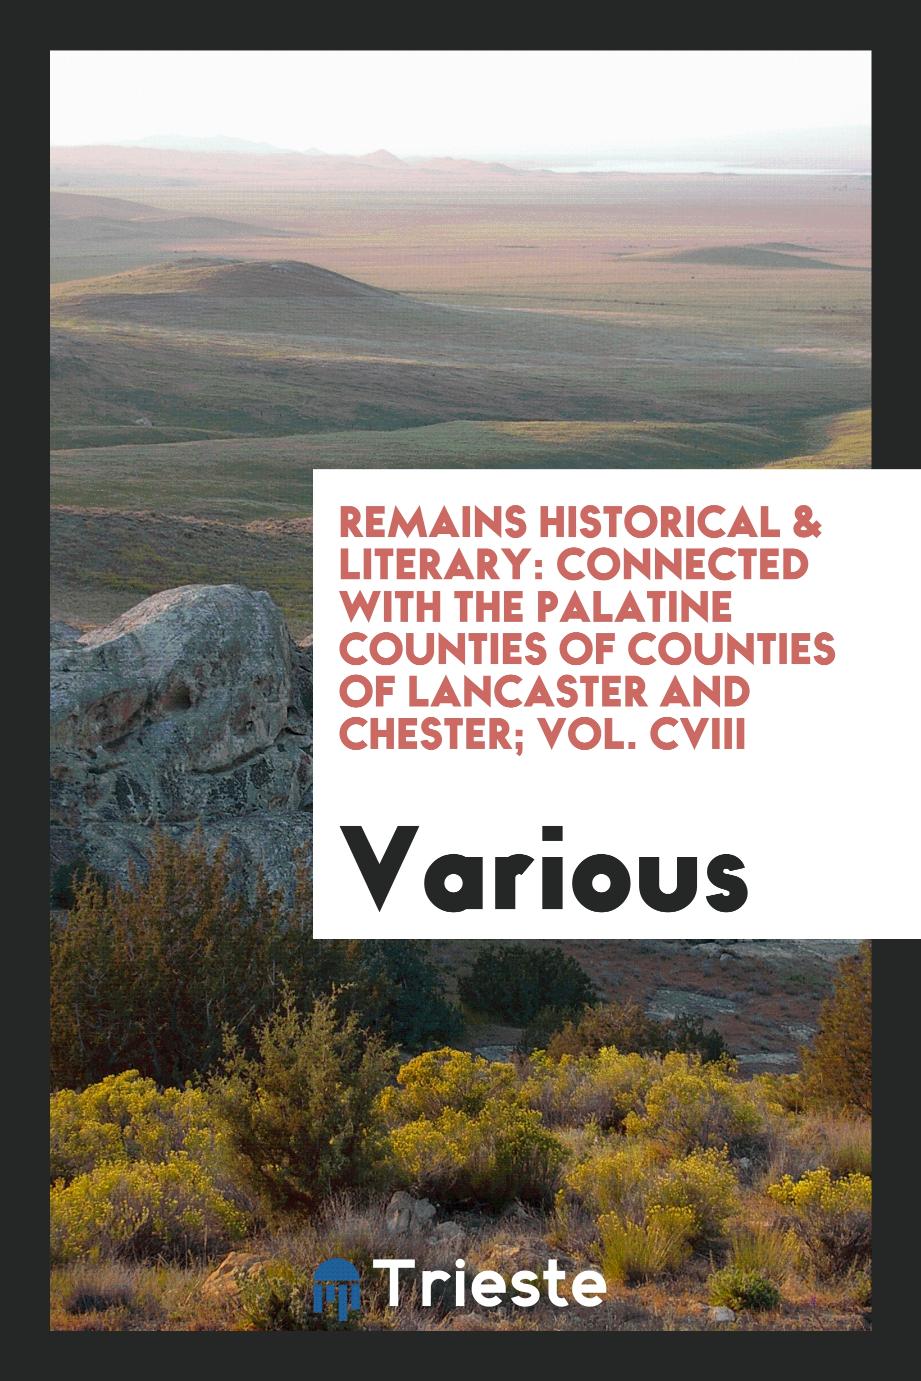 Remains Historical & Literary: Connected with the Palatine Counties of Counties of Lancaster and Chester; Vol. CVIII